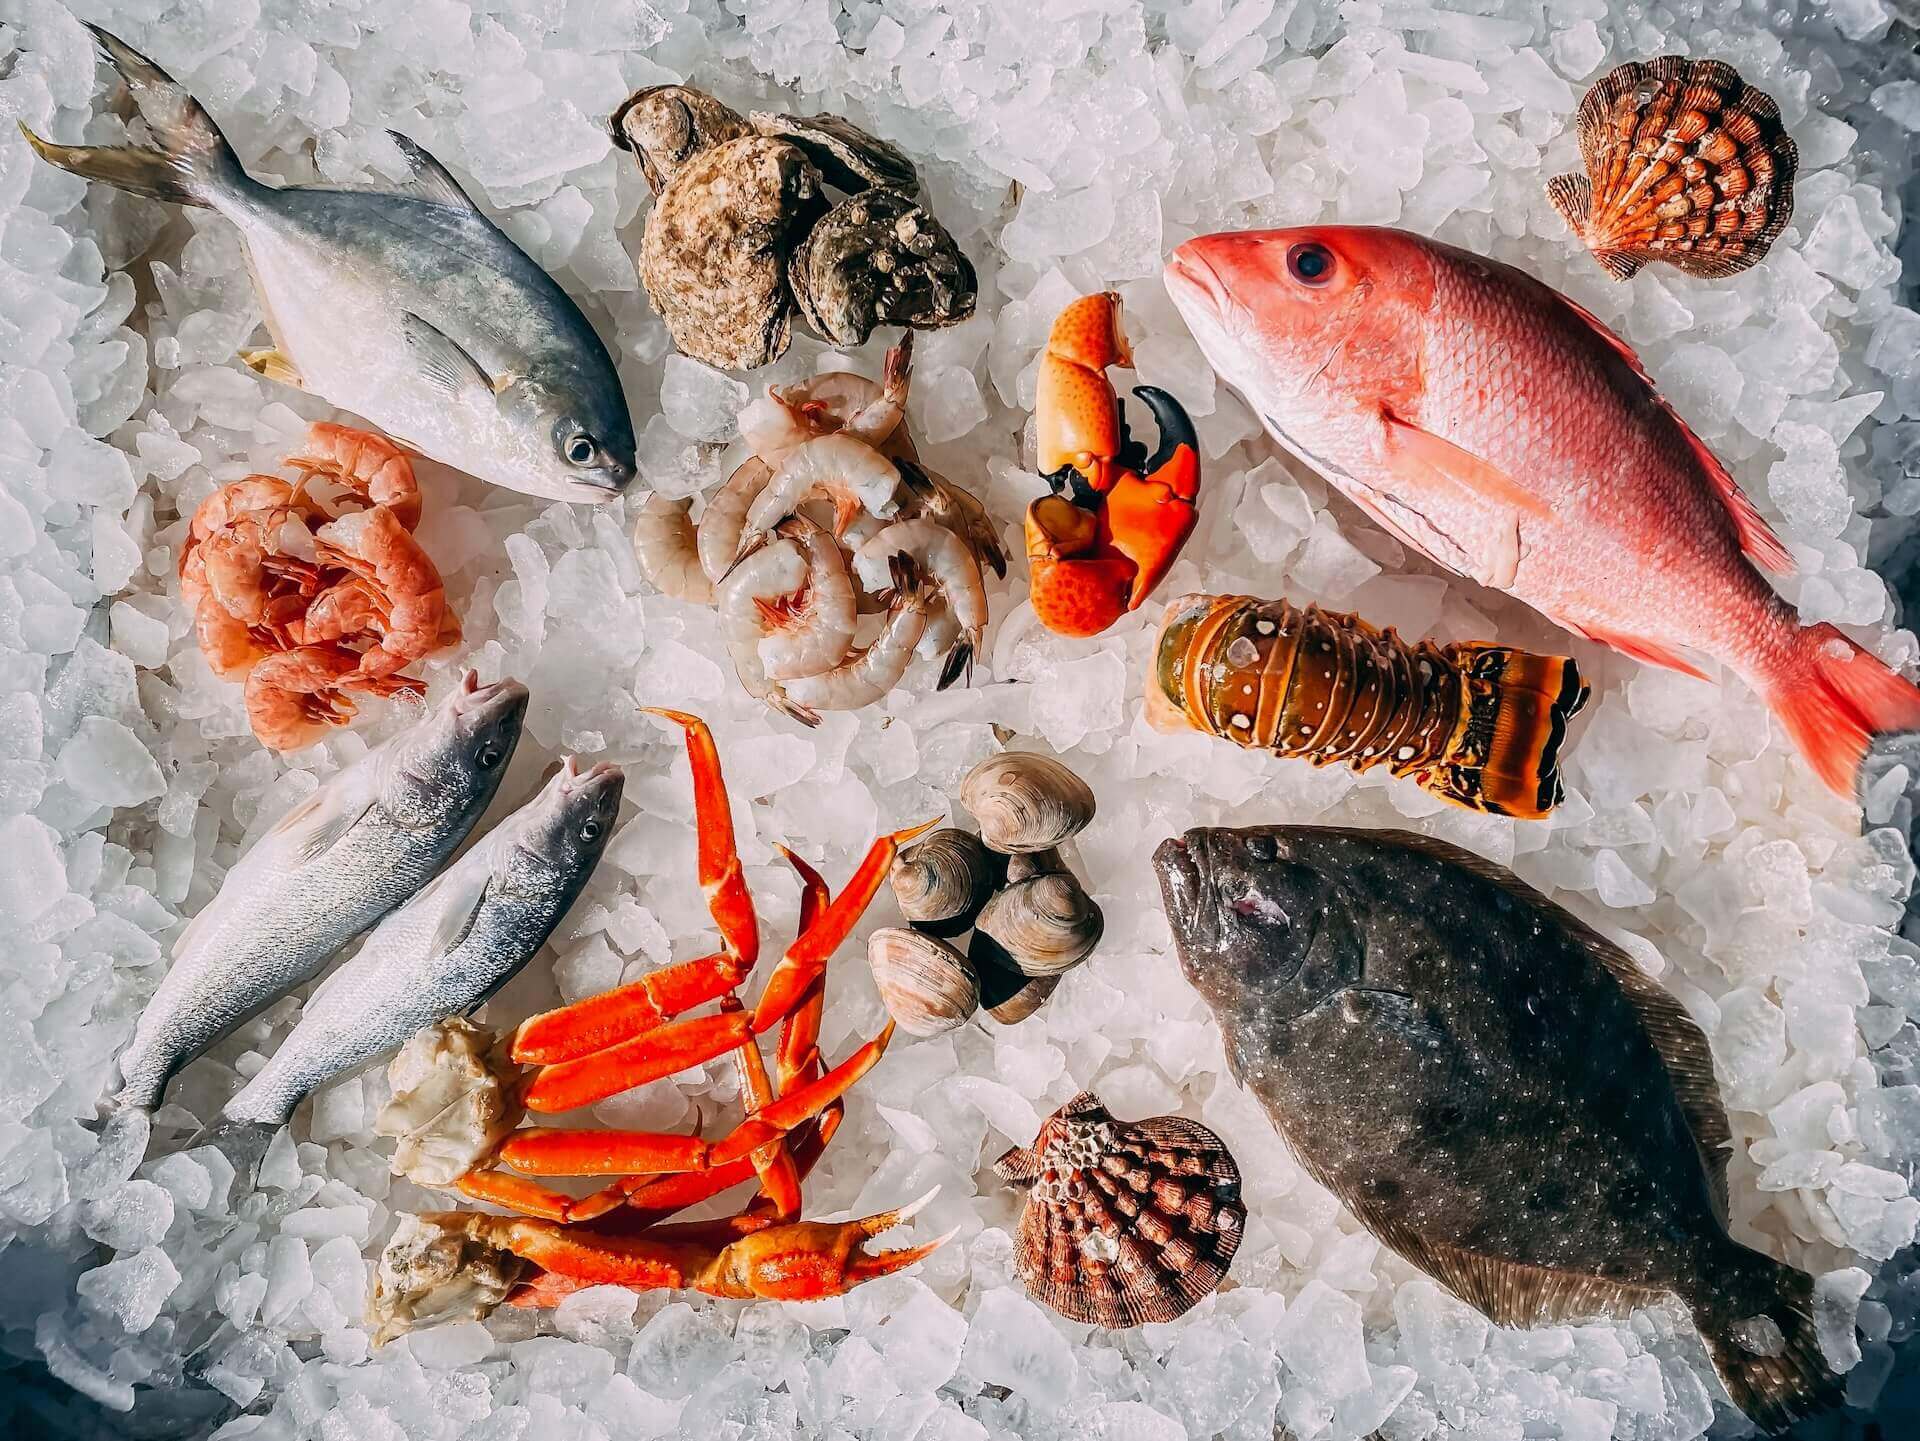 Frozen fishes and seafood on ice